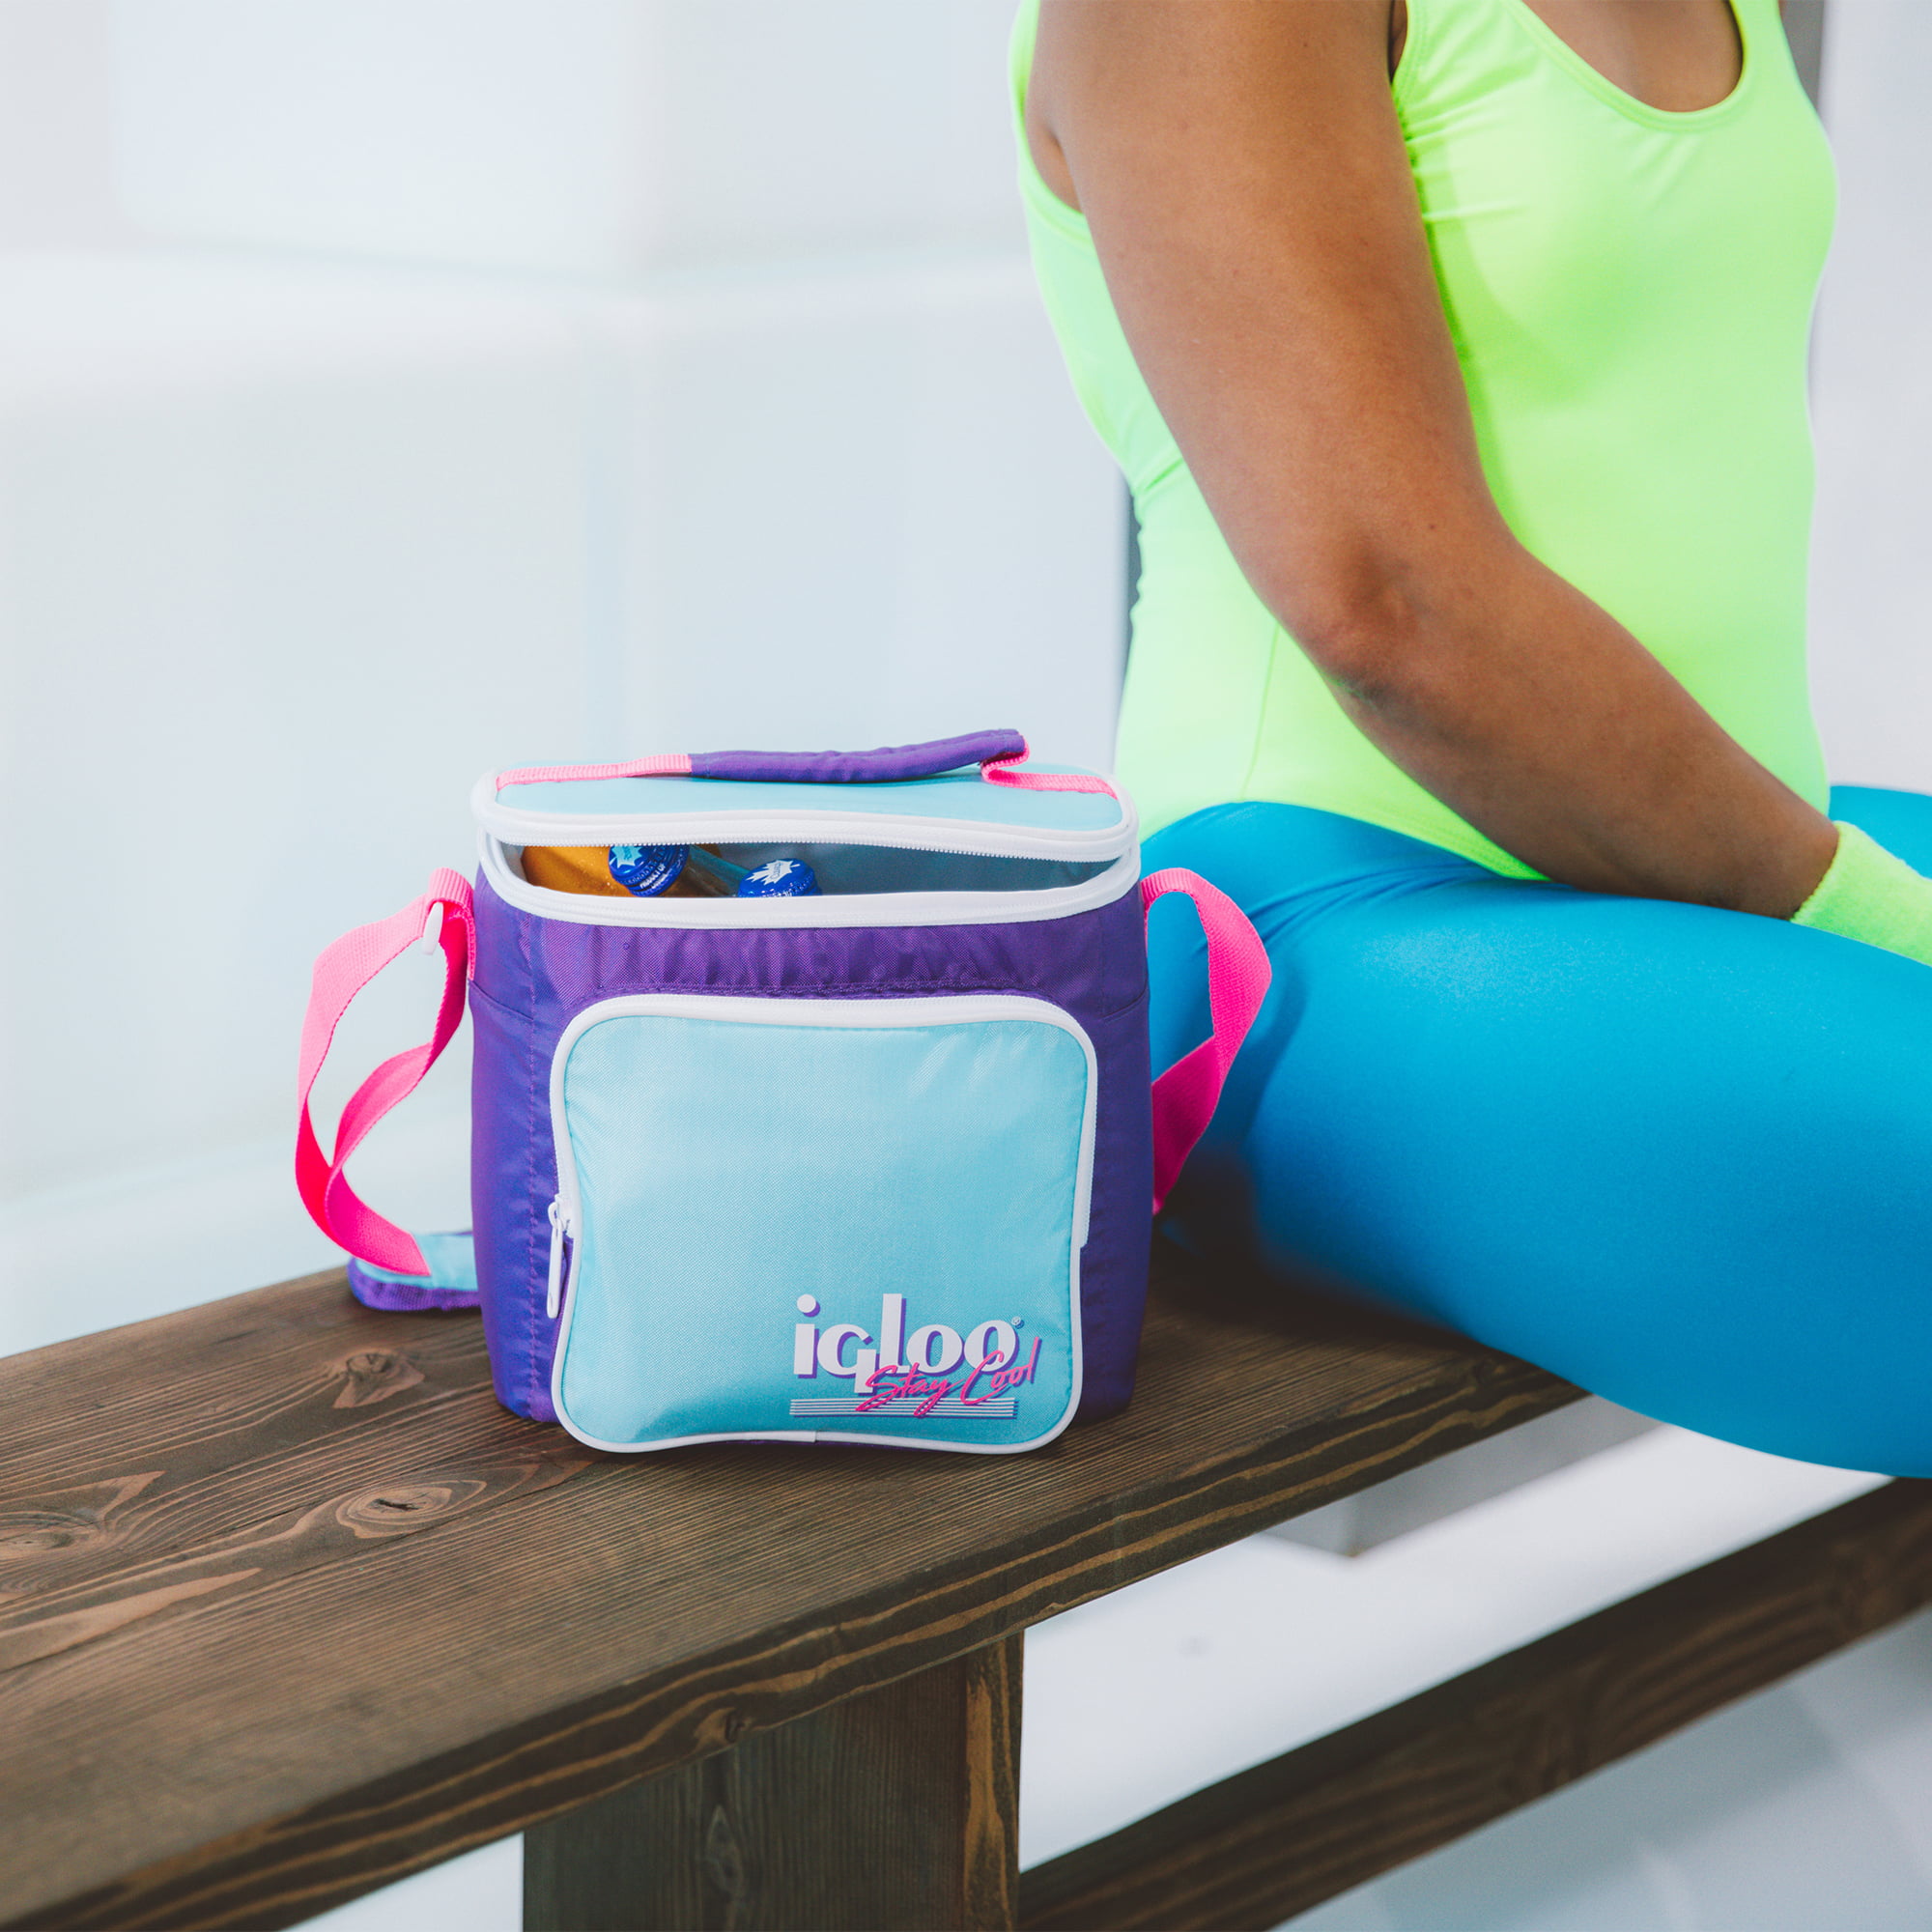 Igloo 90s Retro Collection Square Neon Lunch Box Cooler Bag, Fiesta Blue